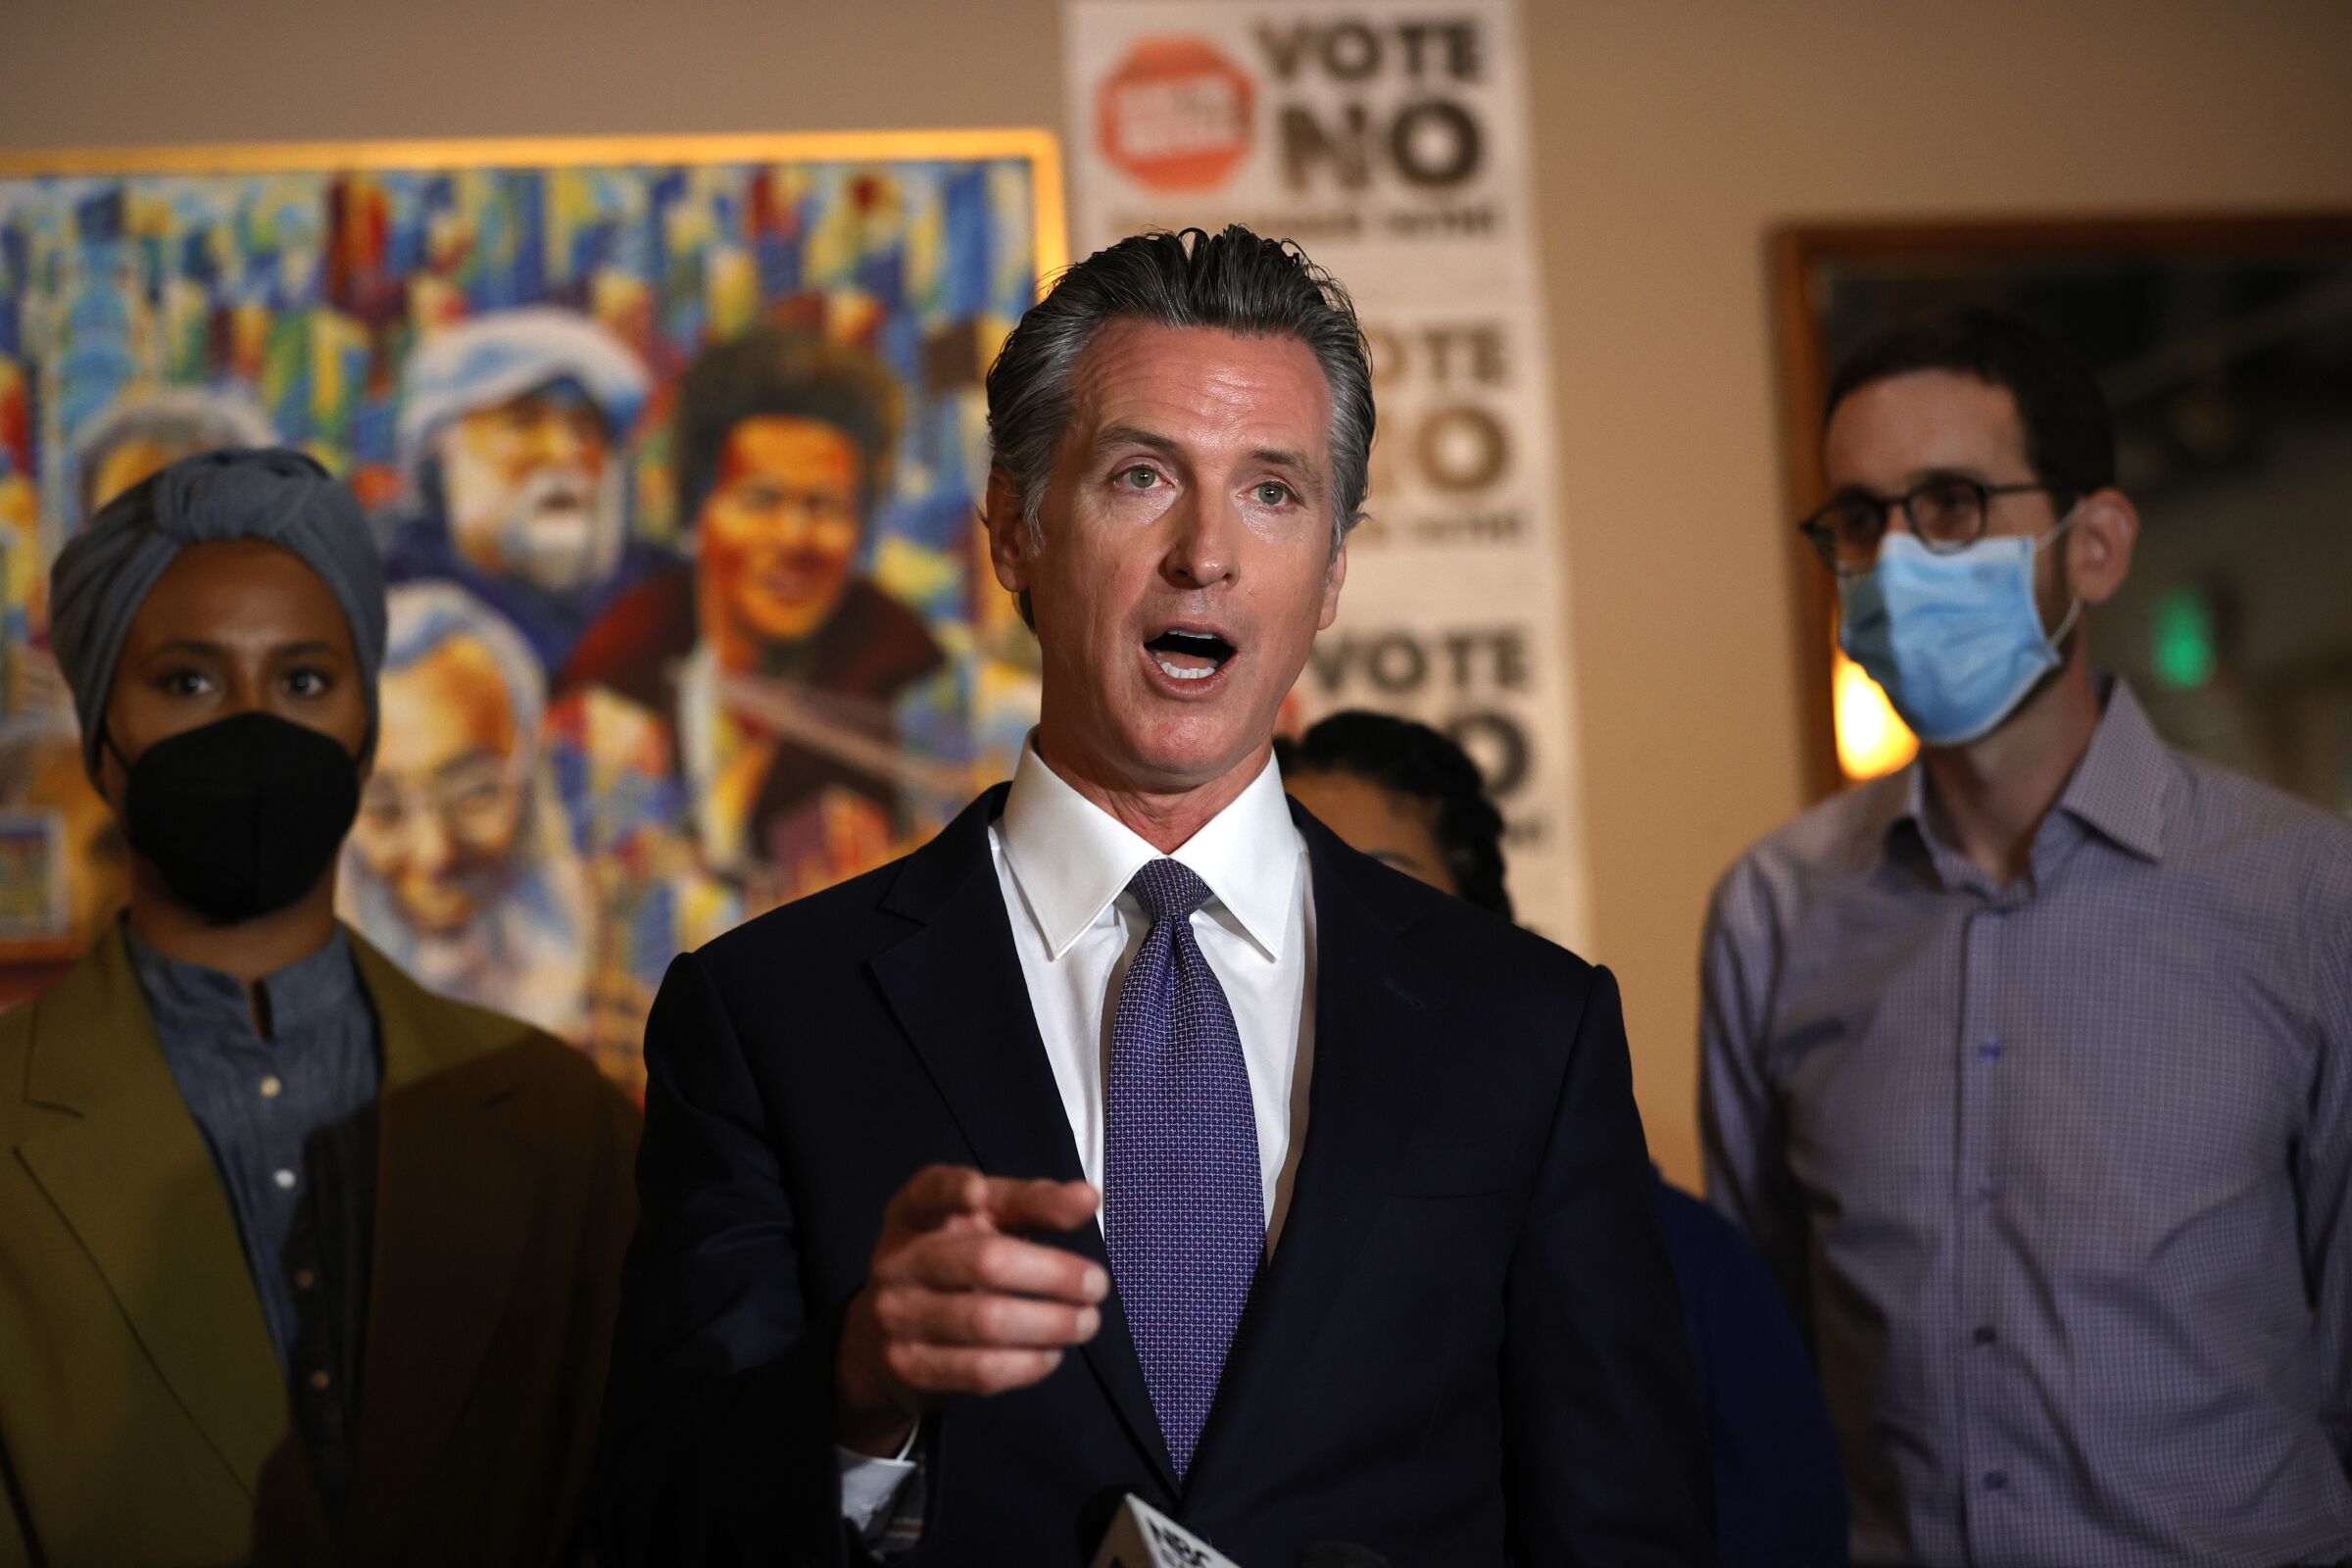 Gavin Newsom, in suit and tie with two people in masks behind him, speaks to media.